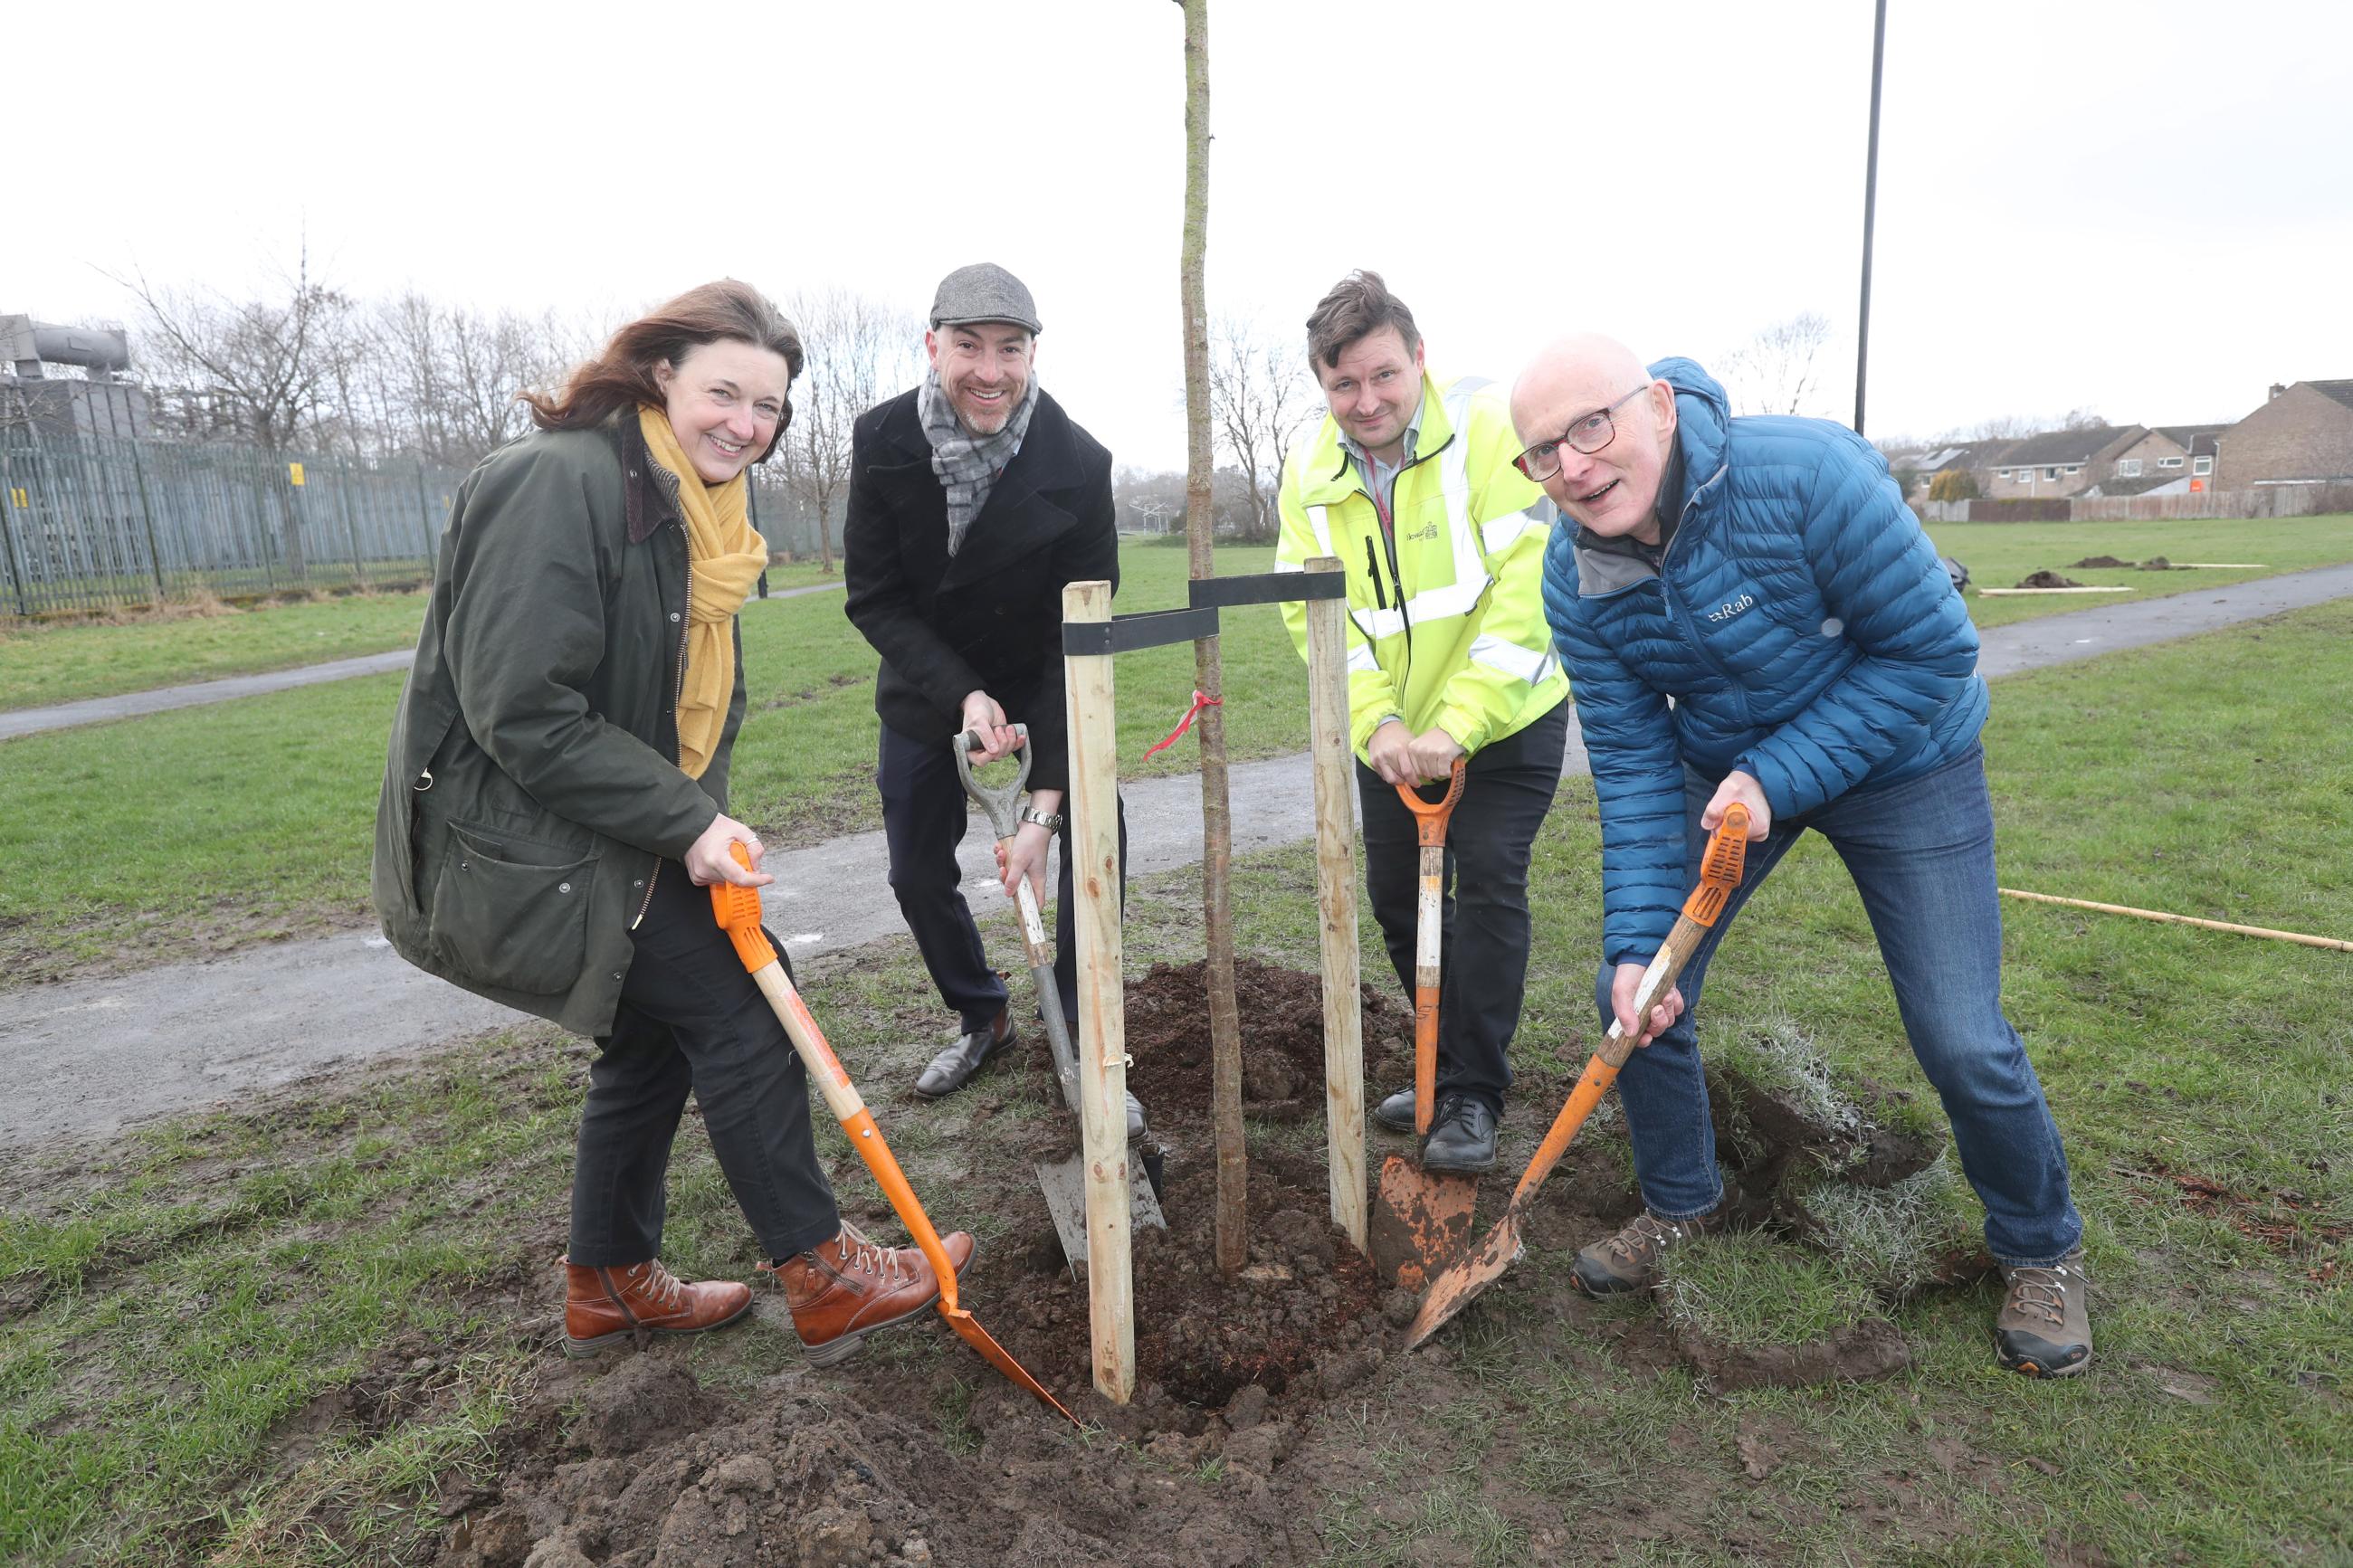 Carol Pyrah, Chief Executive, Urban Green Newcastle, Lloyd Jones, Forest Manager, North East Community Forest, Mark Burrell, Operations Manager, Newcastle City Council, Michael Offord, Director, Optometrist, Michael Offord Opticians